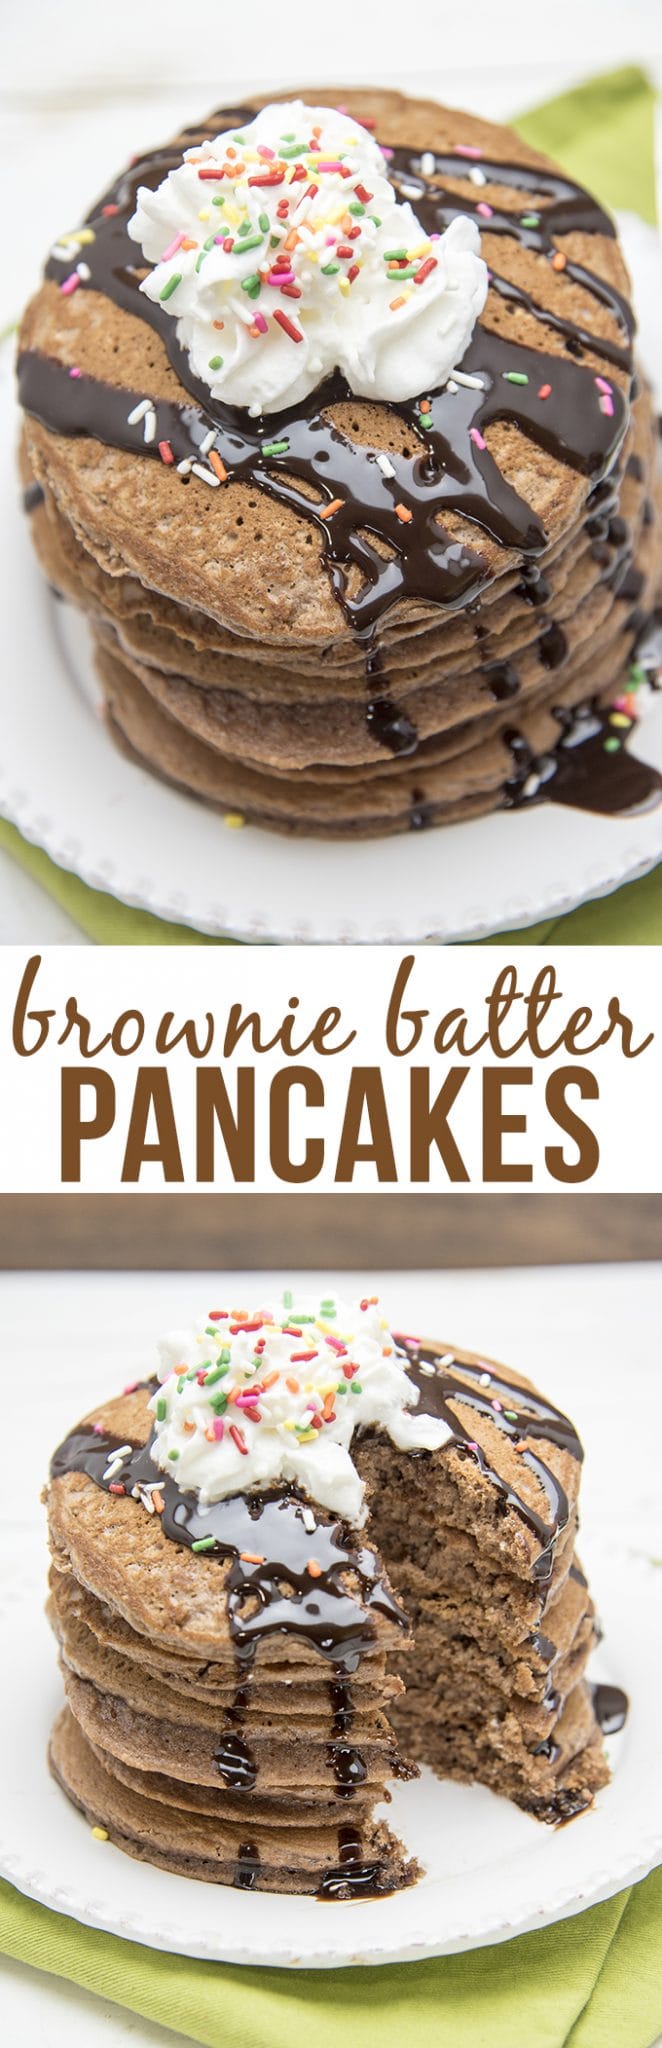 A title card with brownie batter pancakes text.